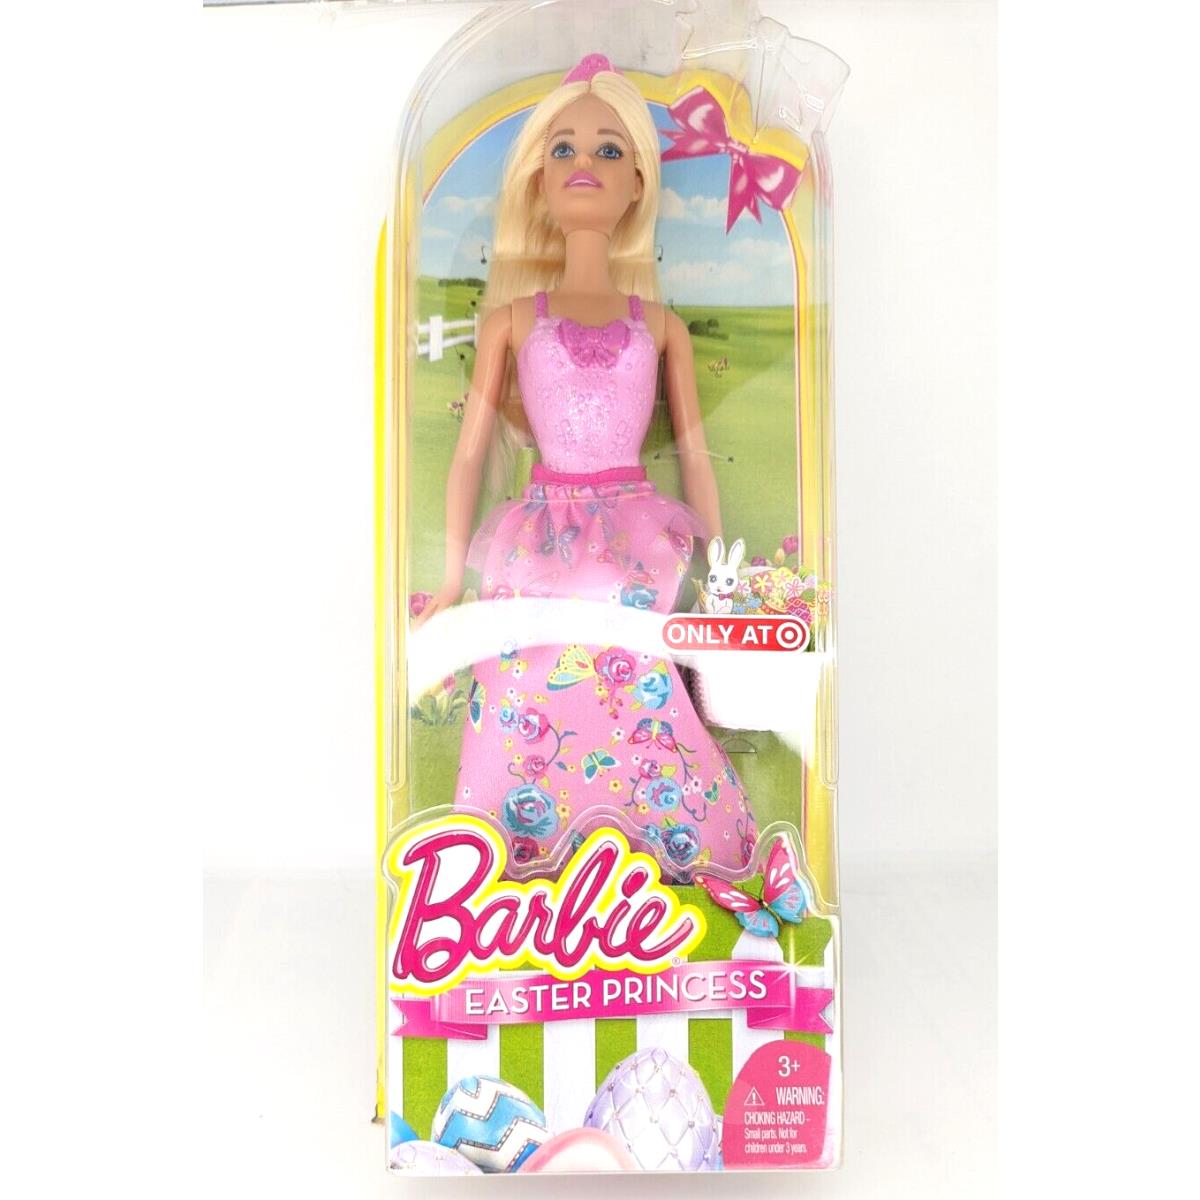 Barbie Easter Princess Doll 2015 Never Opened by Mattel